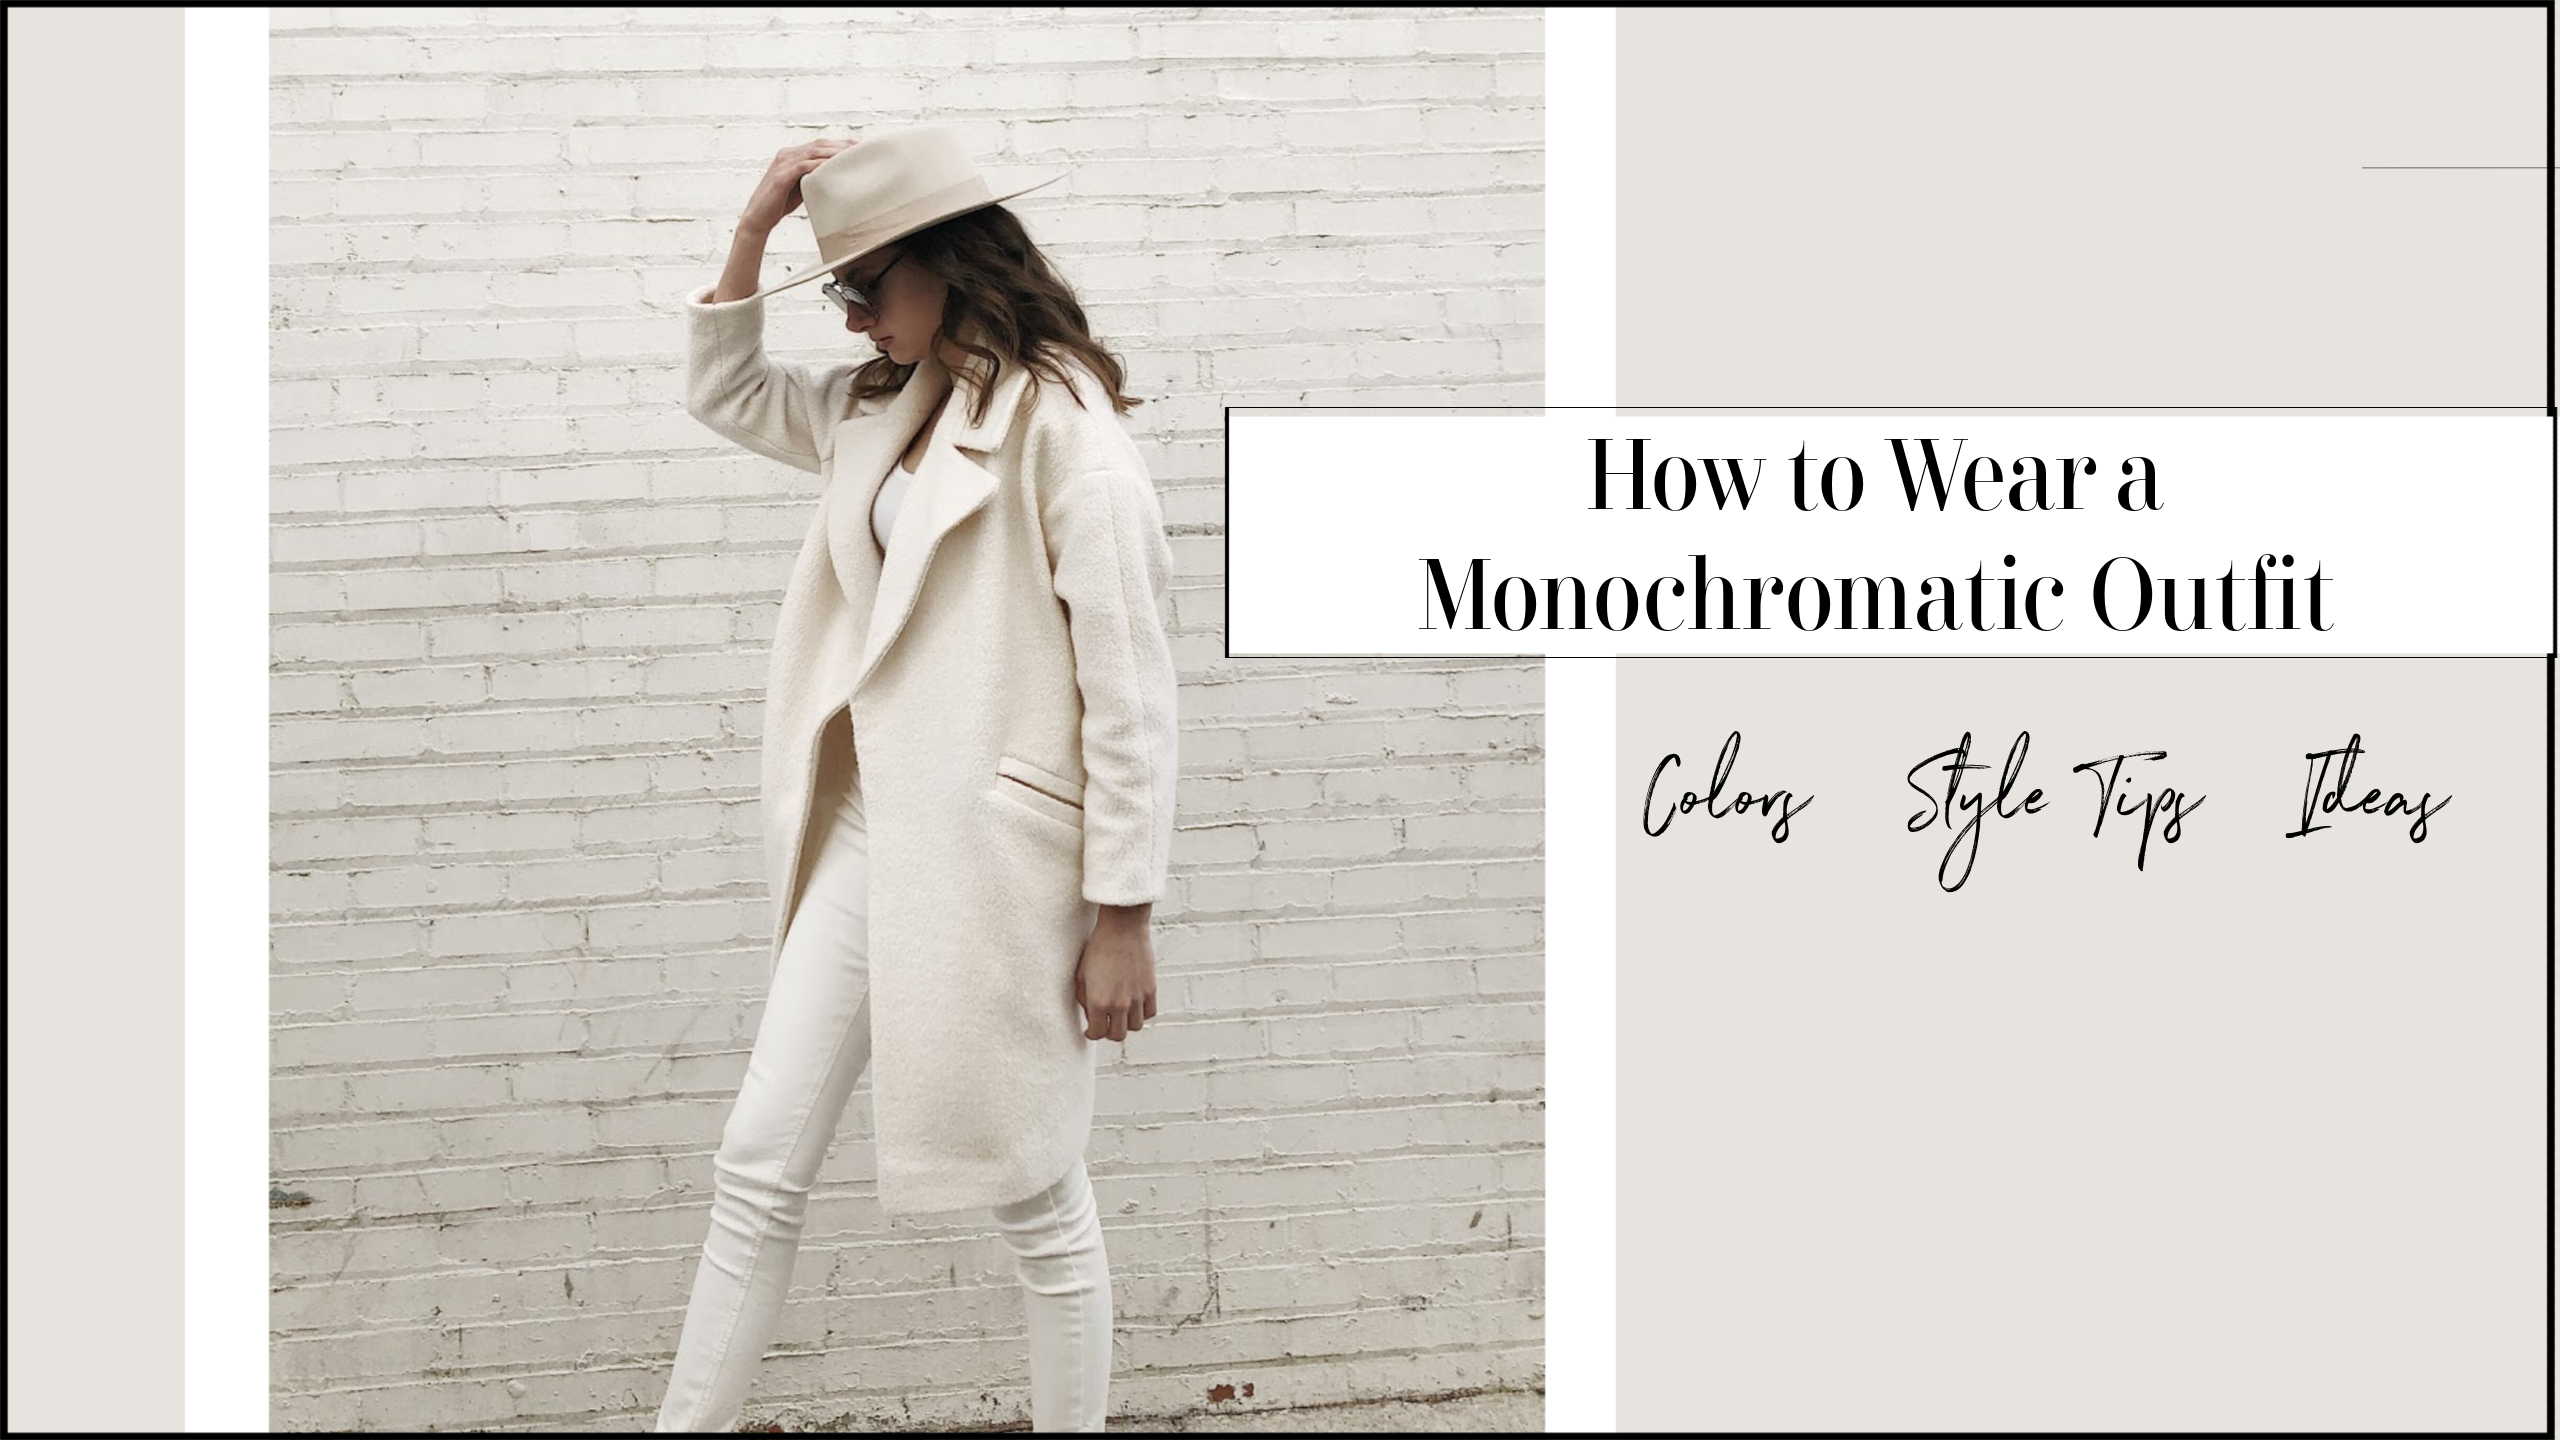 How to Wear a Monochromatic Outfit